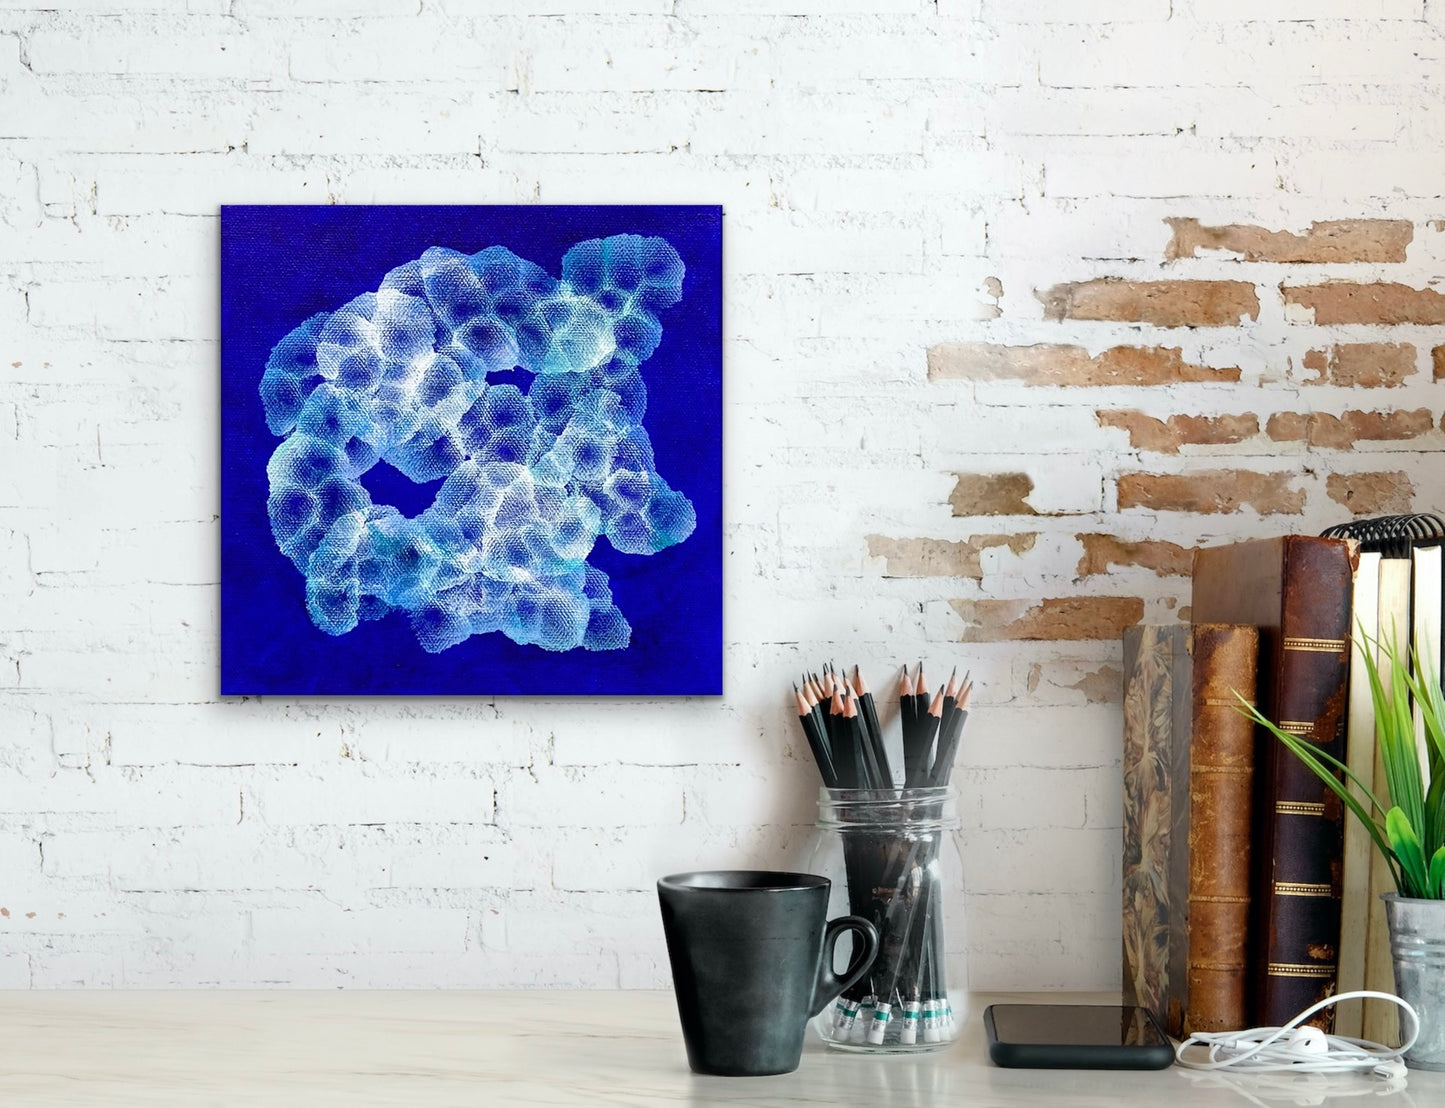 Biomorphic Reef Dancer IV - Abstract Small Sealife Painting